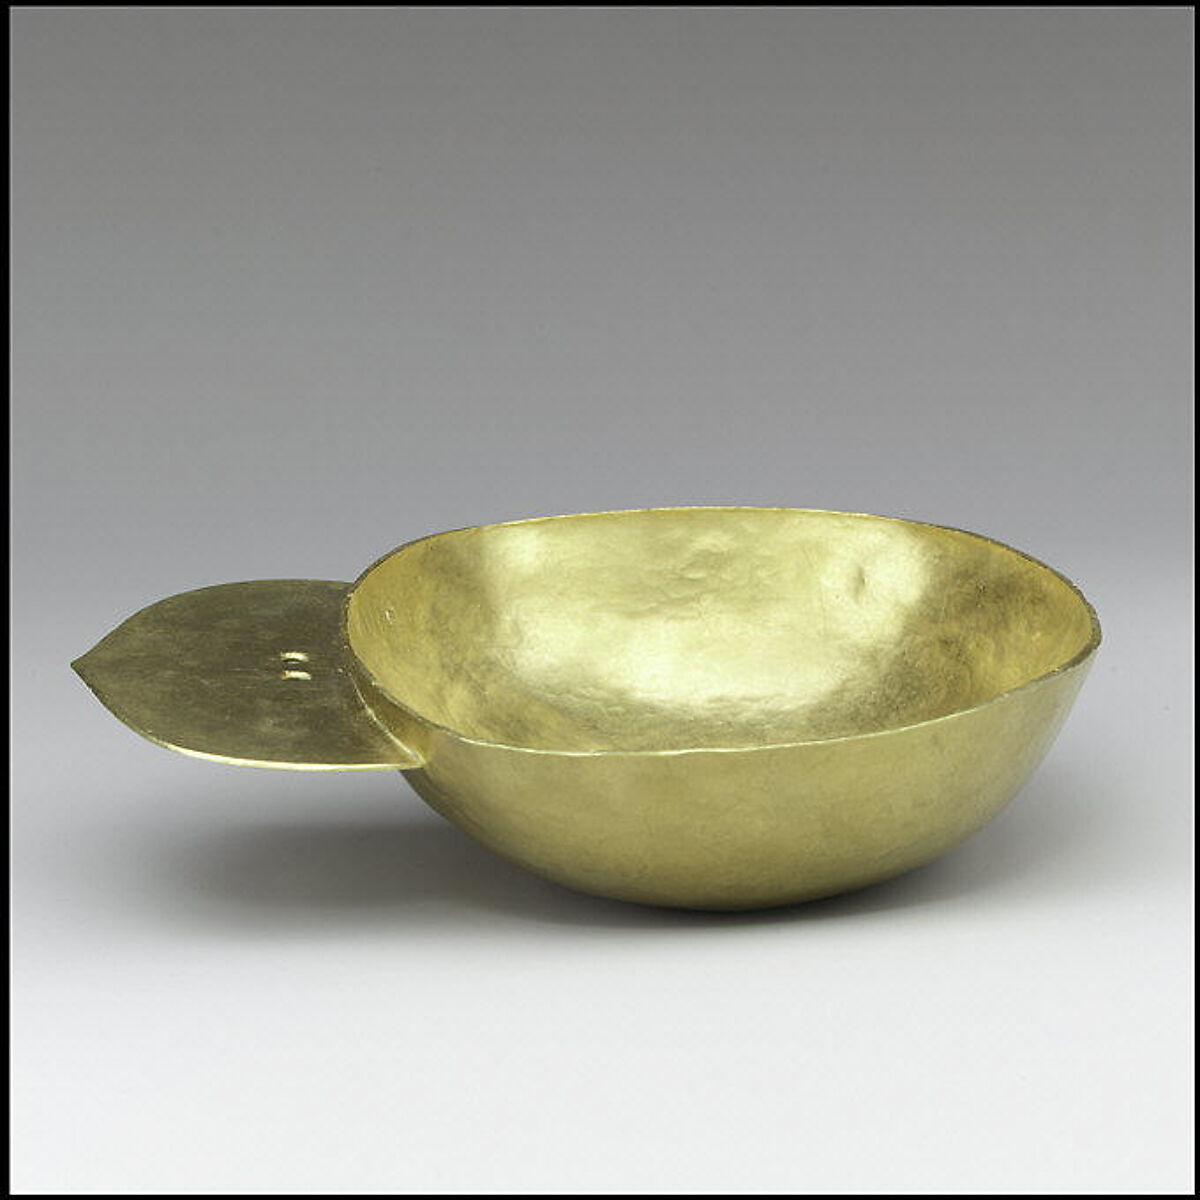 Gold Drinking Bowl with Handle, Gold, Avar 